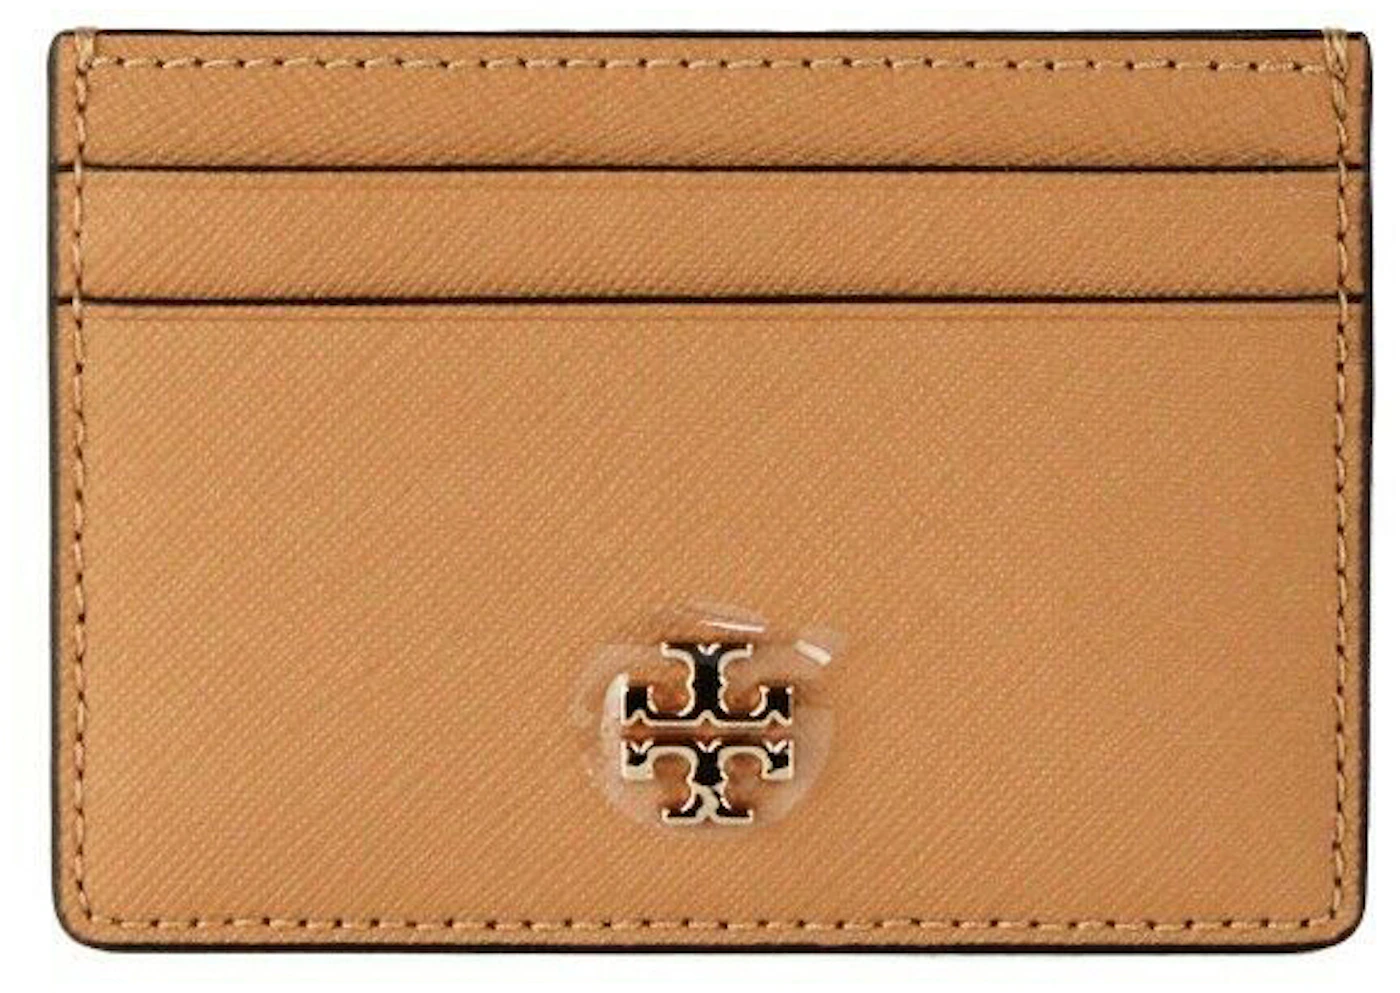 Tory Burch Emerson Slim Card Case New With 40$ for Sale in Ladera Ranch, CA  - OfferUp